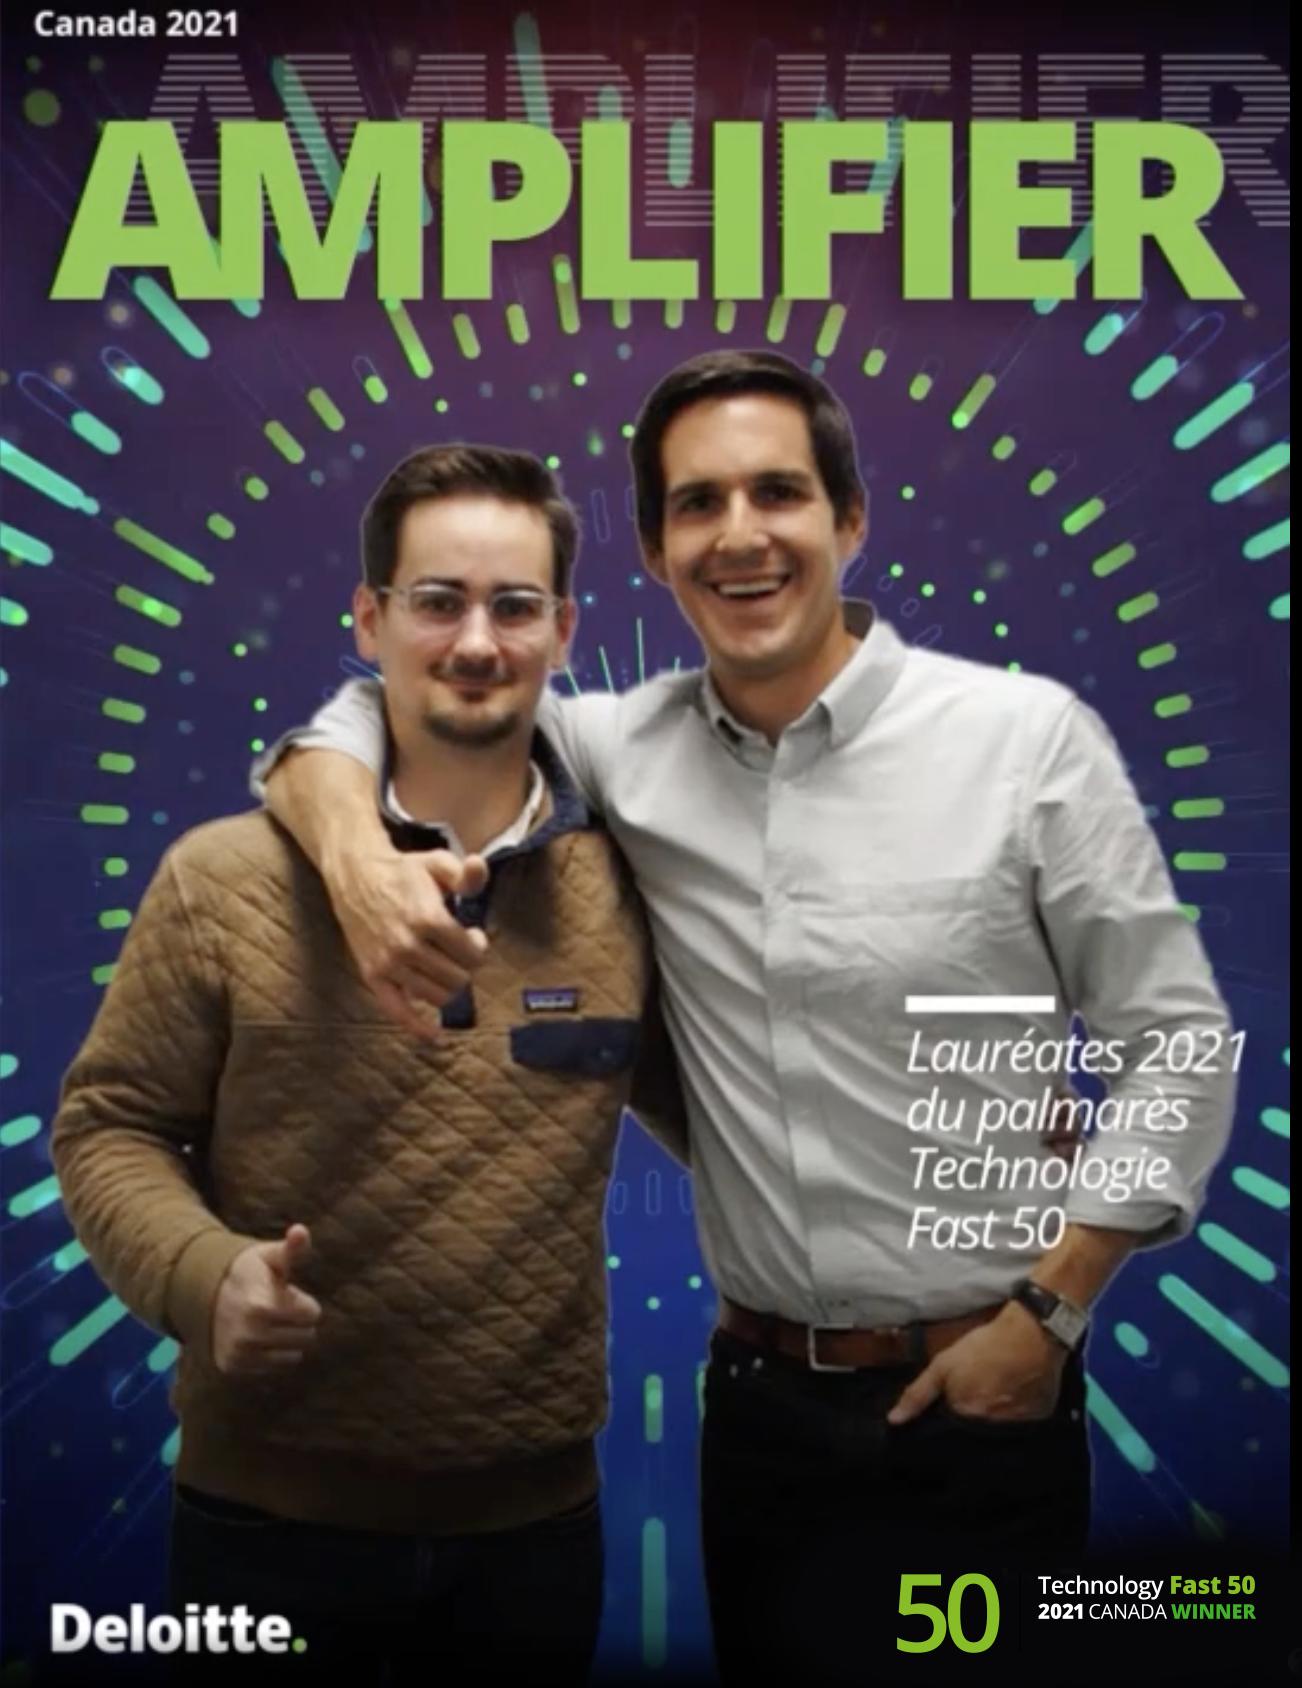 The founders of Poka on the cover of Amplifier magazine.